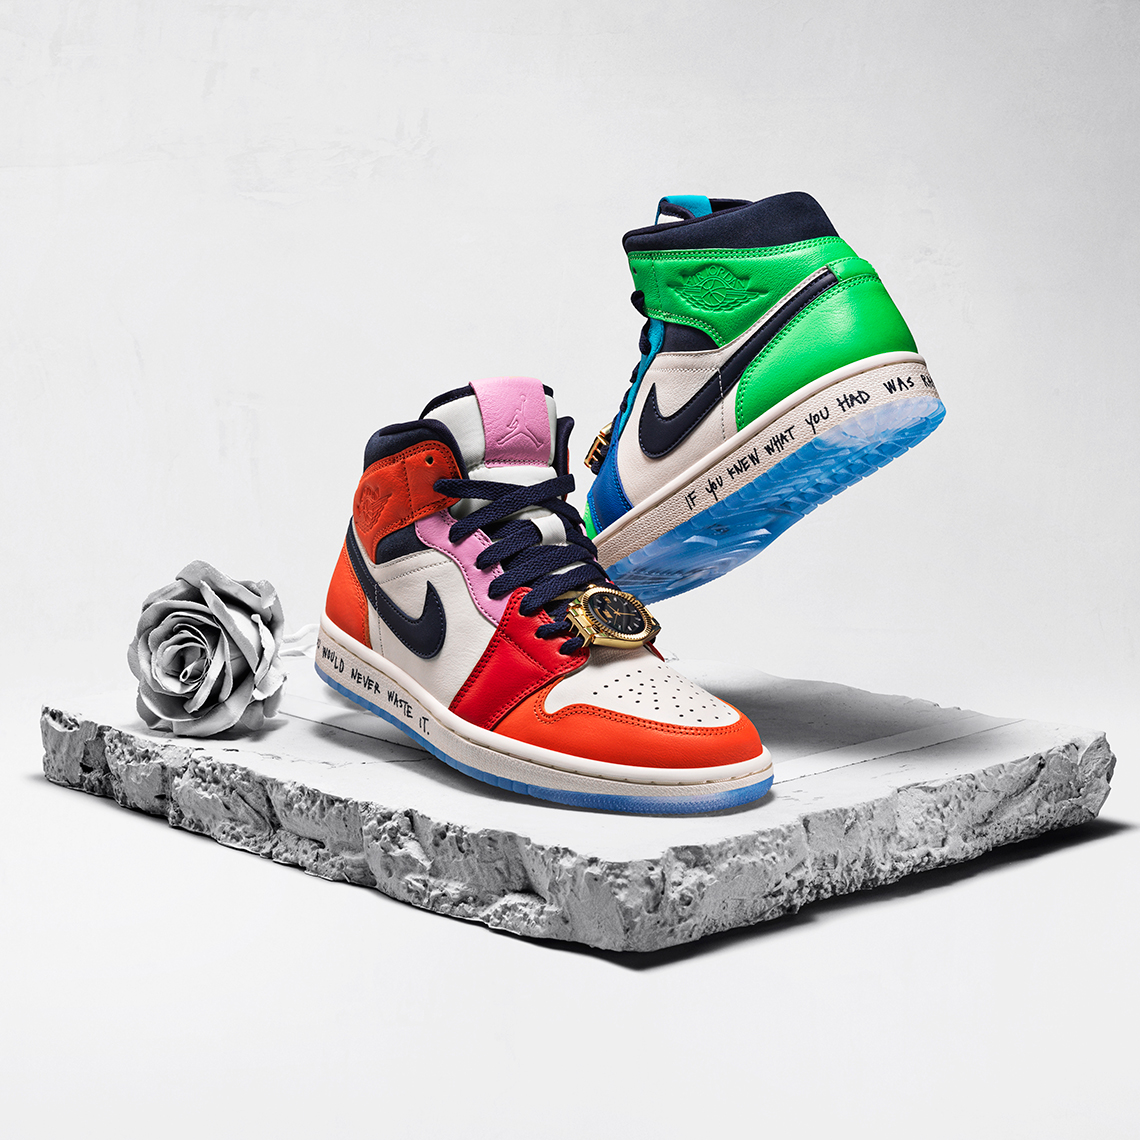 A Full Look At The Air Jordan 1 Fearless Ones Collection